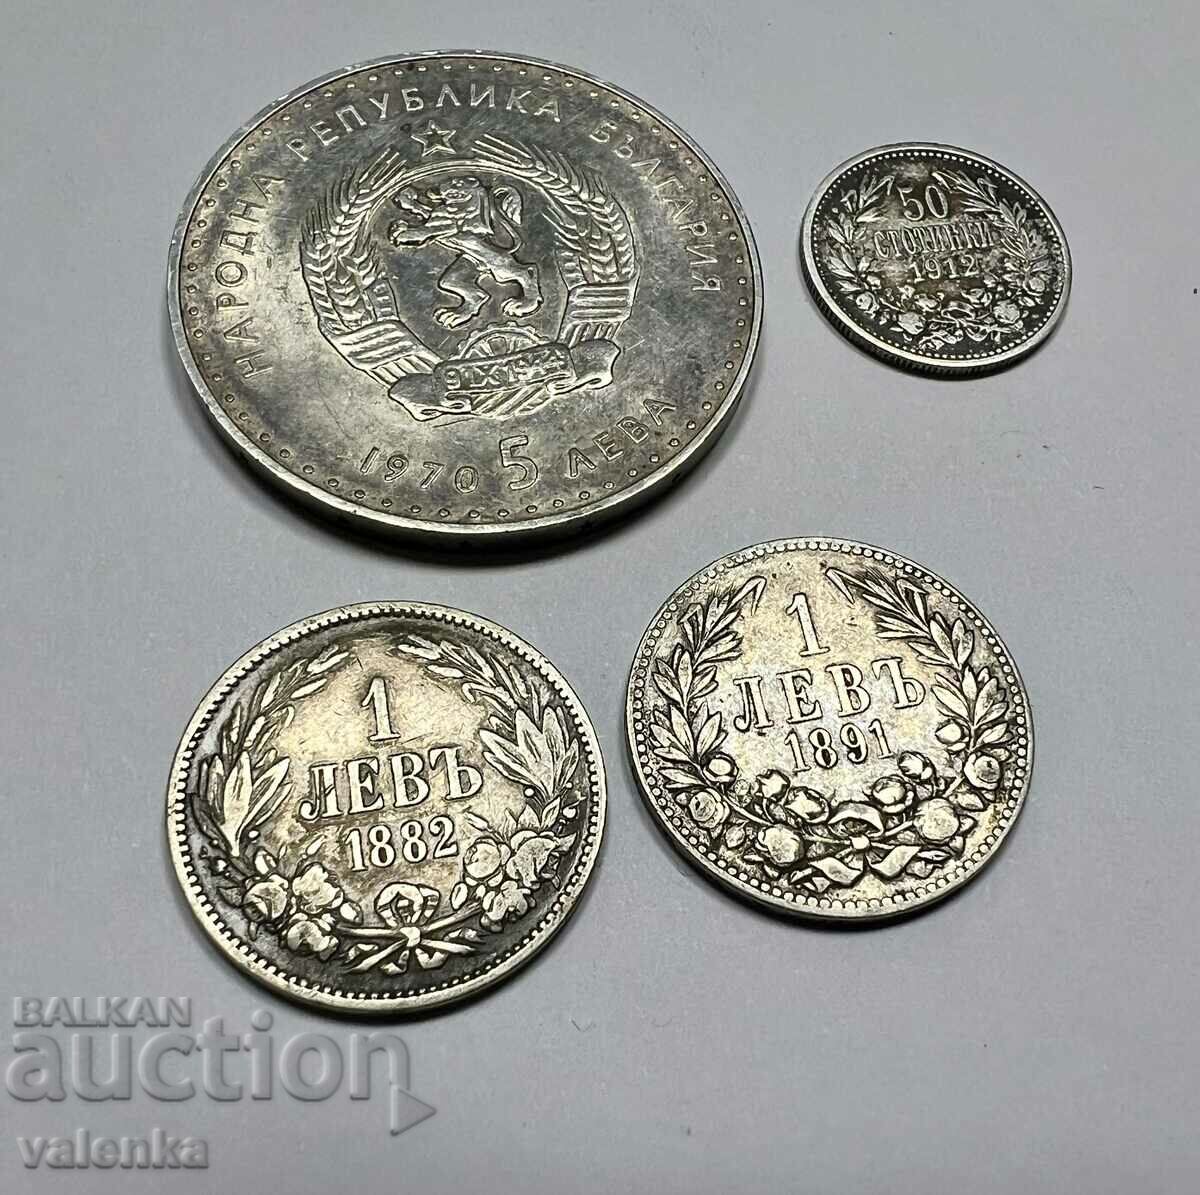 Lot 4 pcs. Silver coins 50 cents, 1 BGN 1882 and 1891, 5 BGN 1970